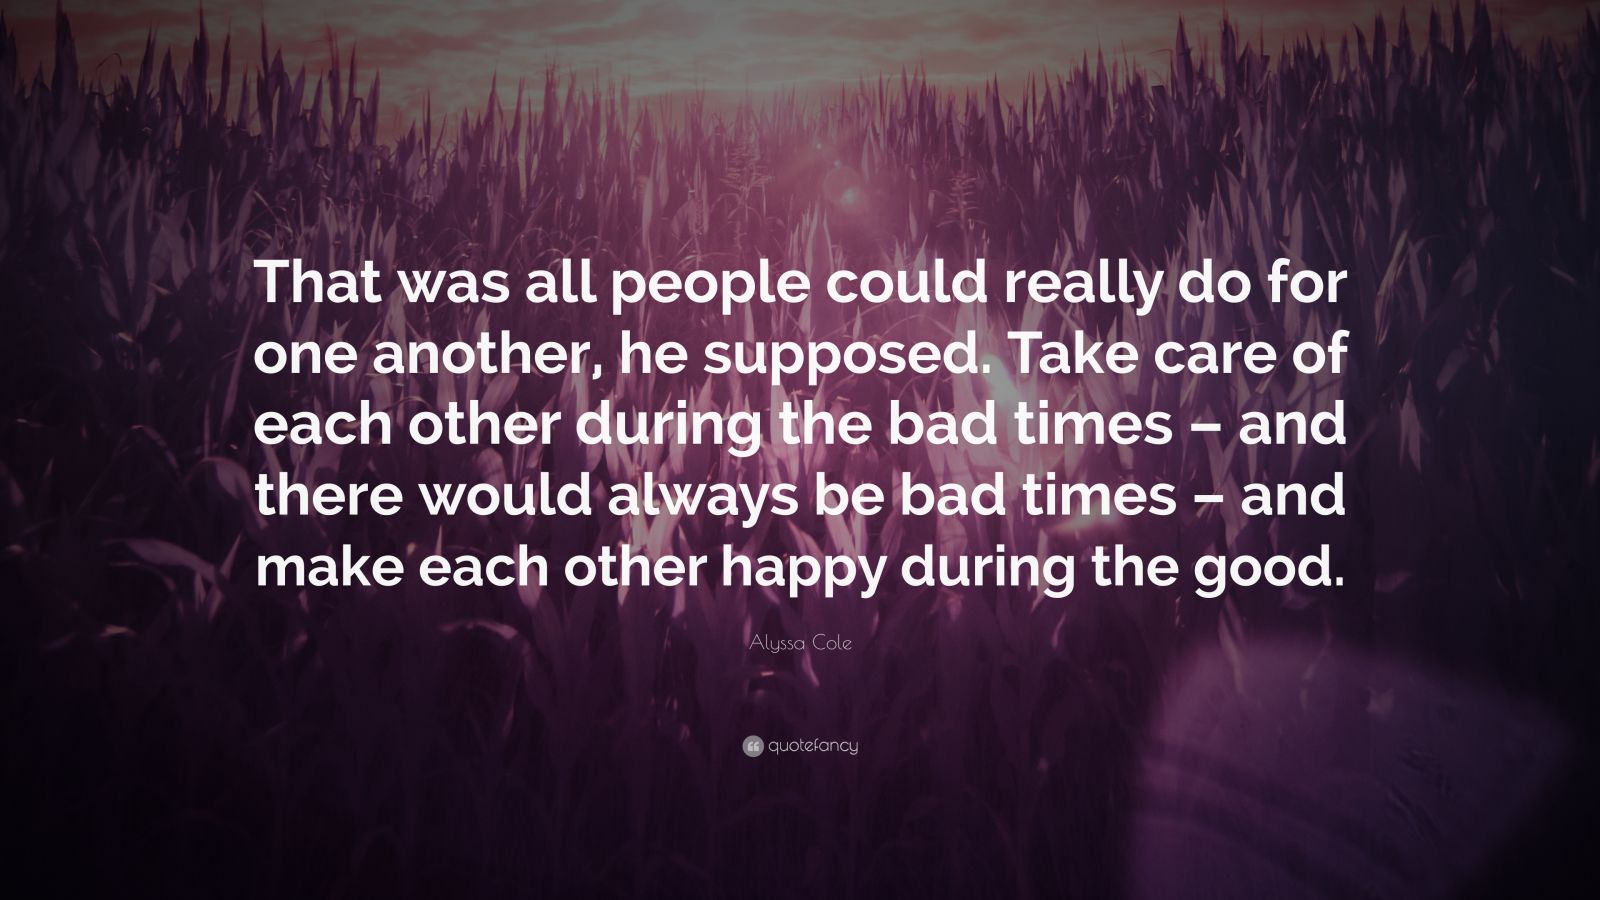 Alyssa Cole Quote: “That was all people could really do for one another ...